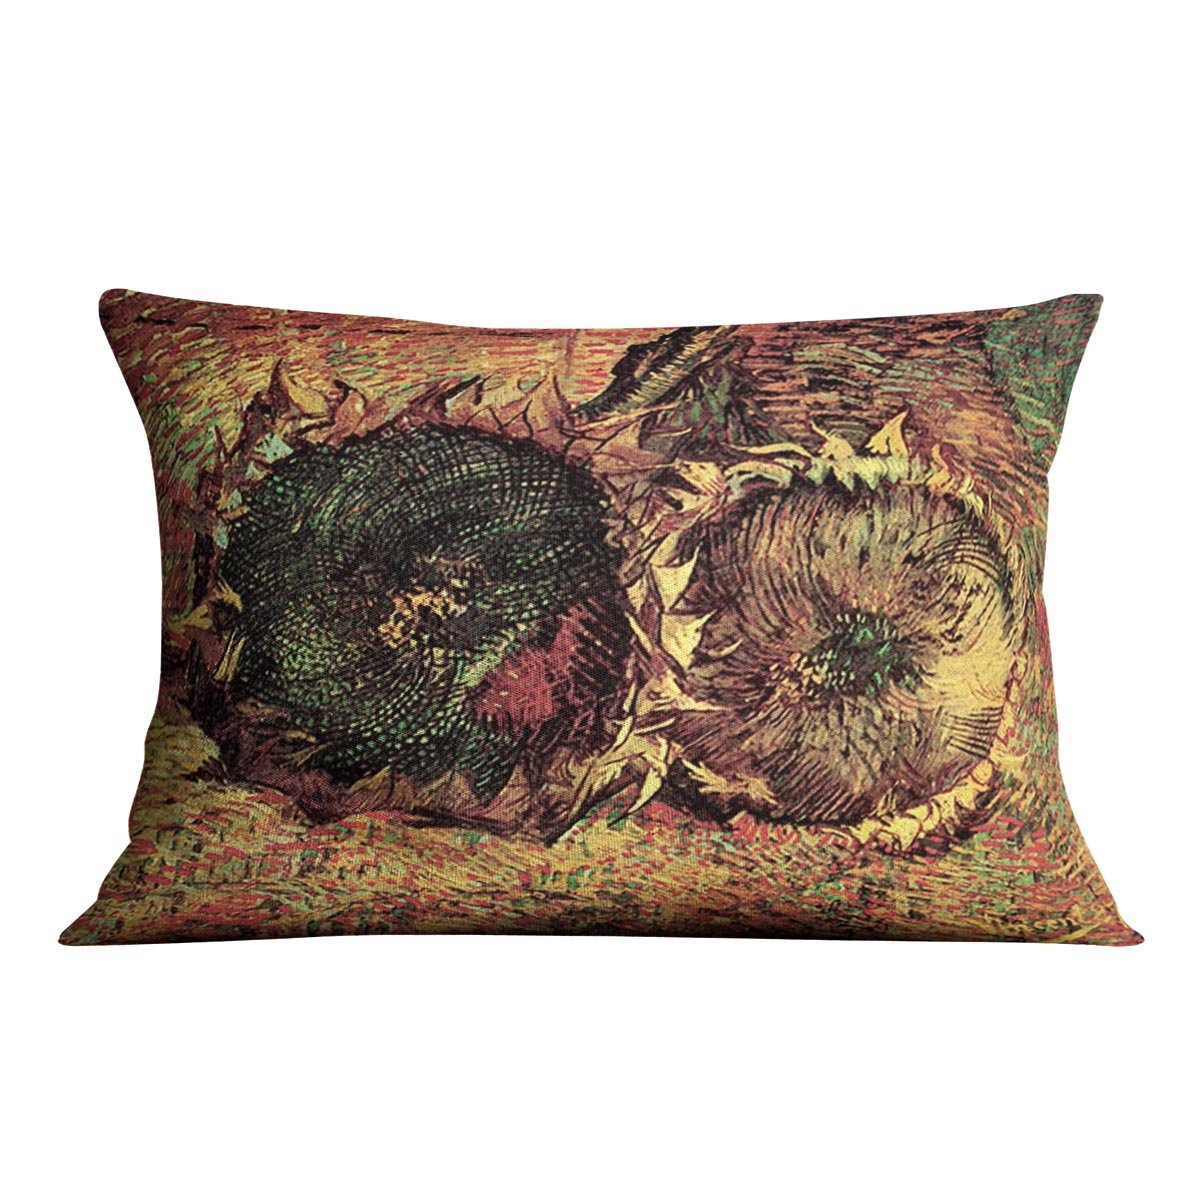 Two Cut Sunflowers 2 by Van Gogh Throw Pillow